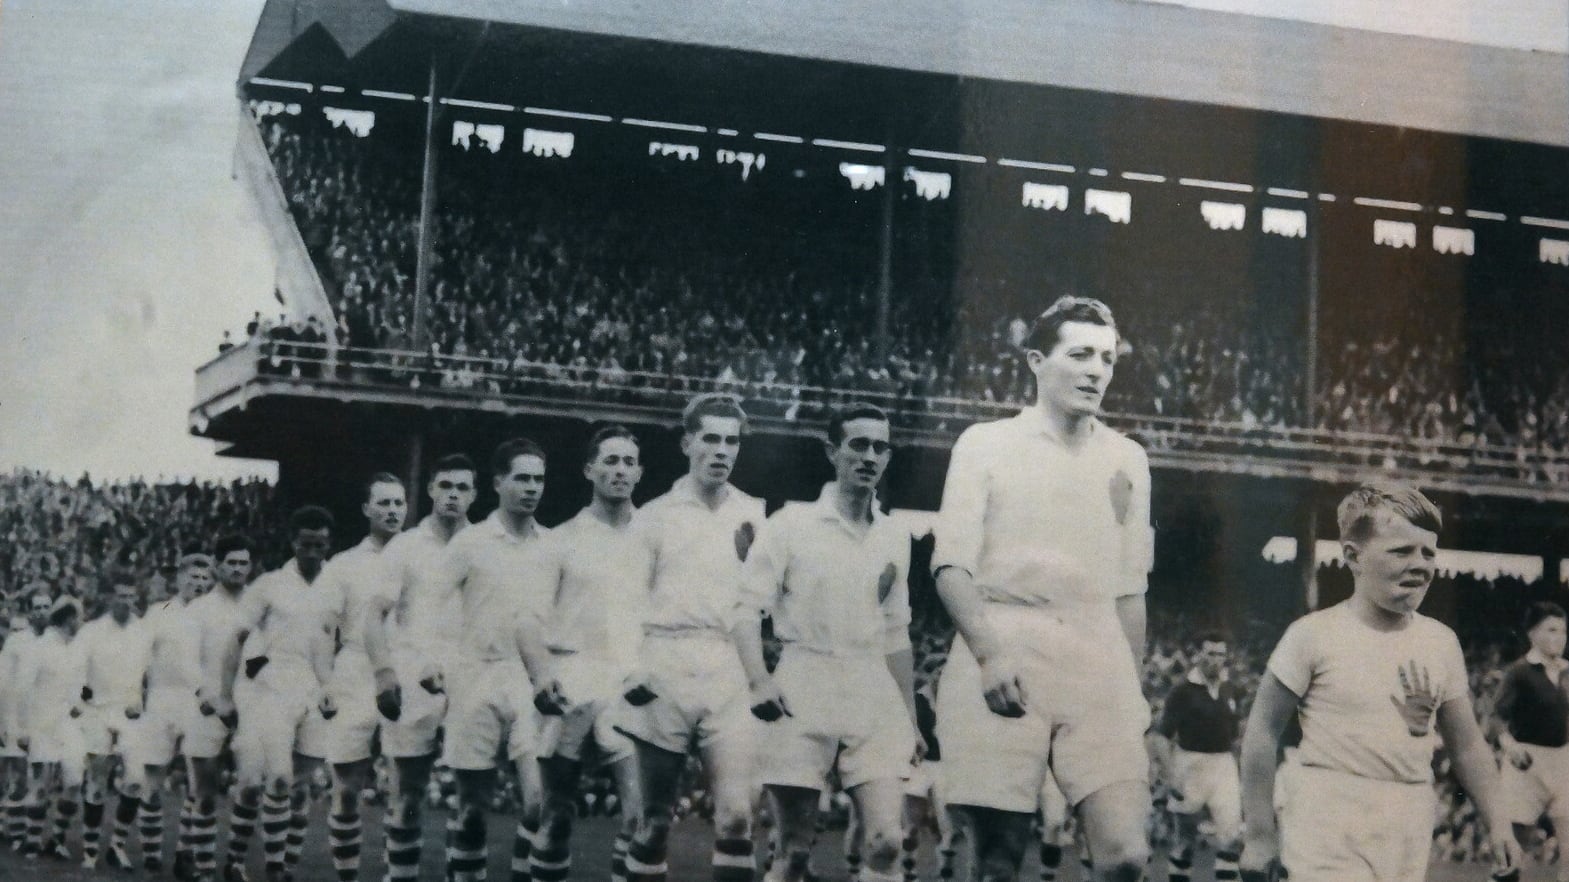 Jody O'Neill captaining Tyrone in the 1956 All-Ireland SFC semi-final against Galway. The late Jim Devlin was a key member of that Red Hand squad